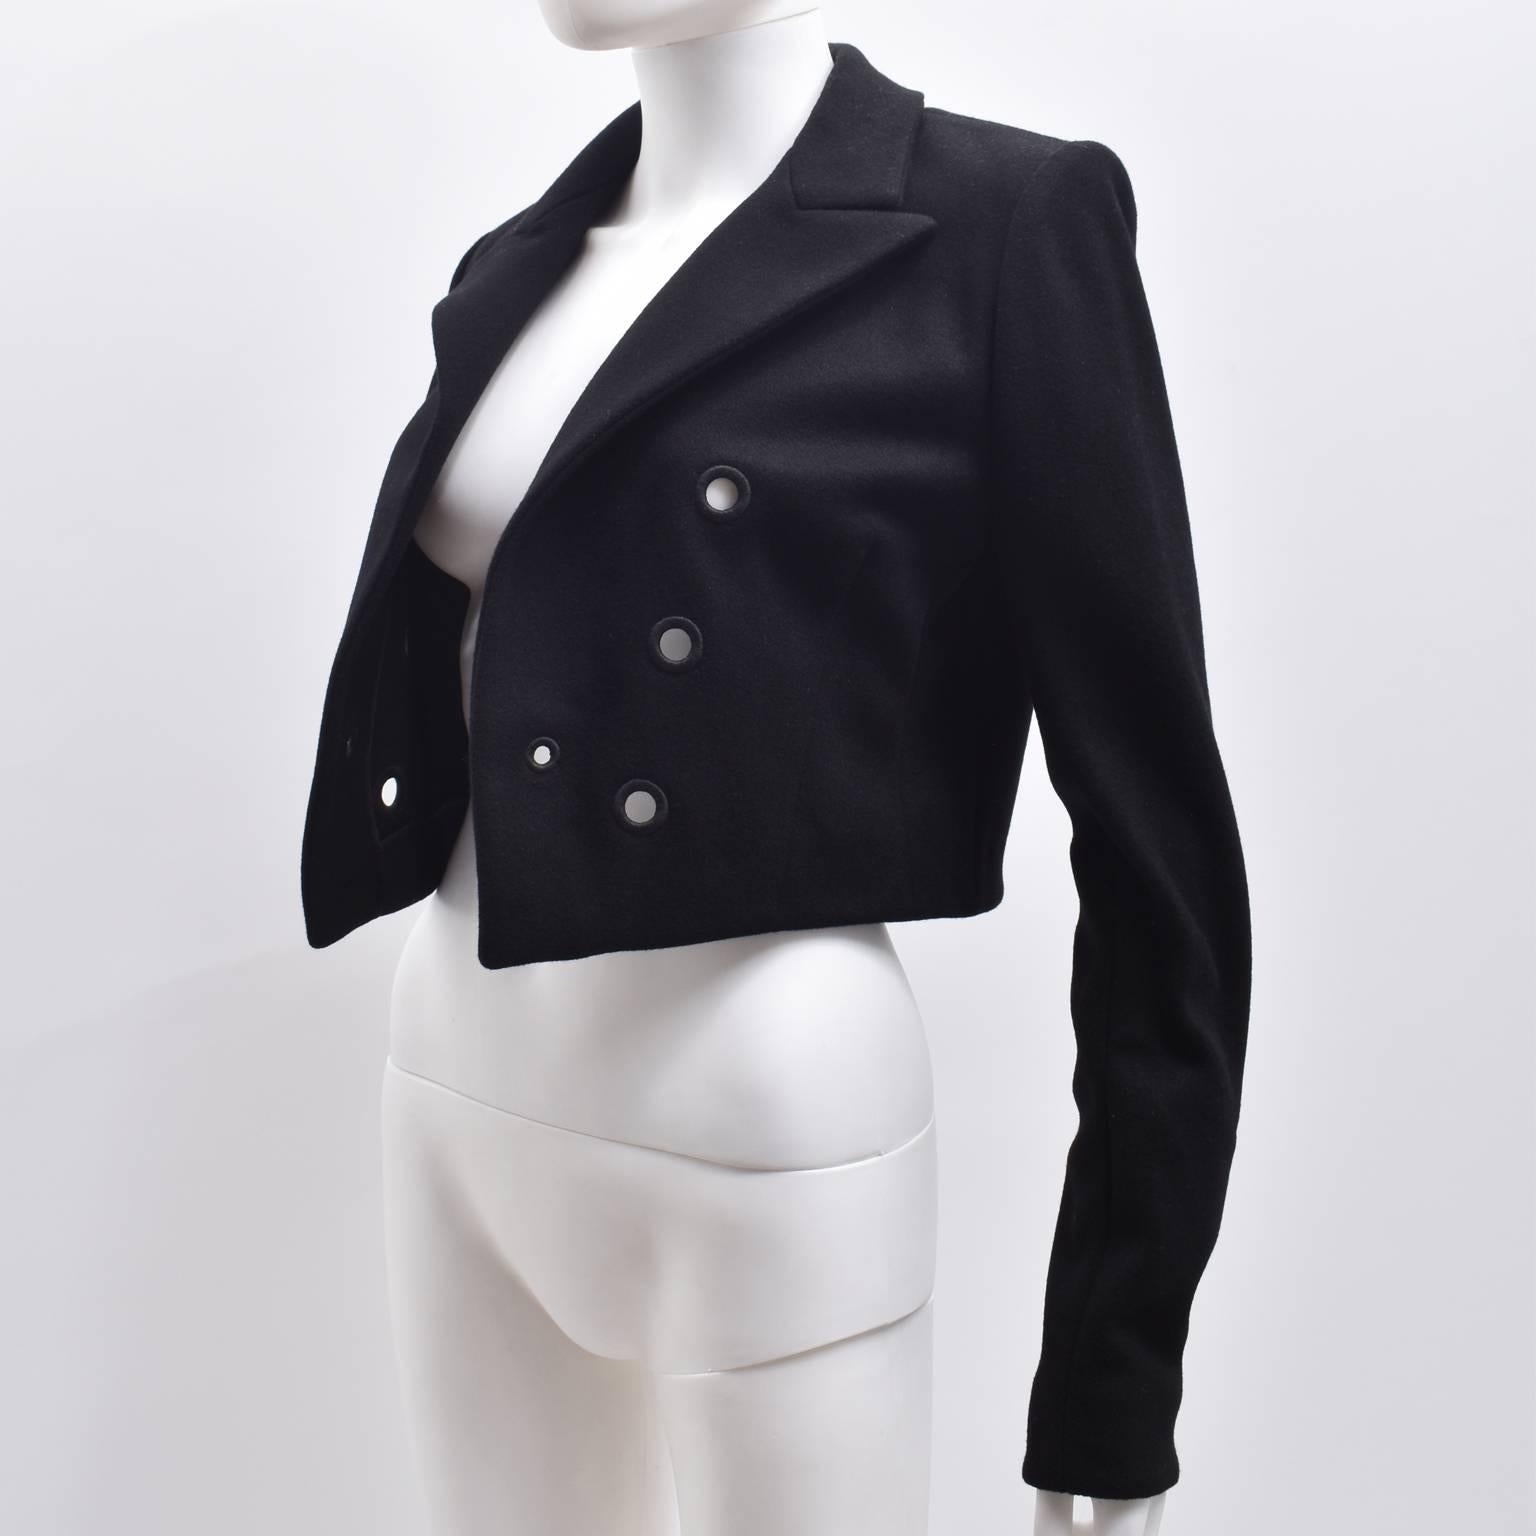 Thierry Mugler Black Wool Cropped Open Jacket with Embroidered Circle Eyelet Details

An elegant black cropped jacket from Thierry Mugler. The jacket has a simple cropped shape with long sleeves and is designed to be worn open like a Bolero. It also